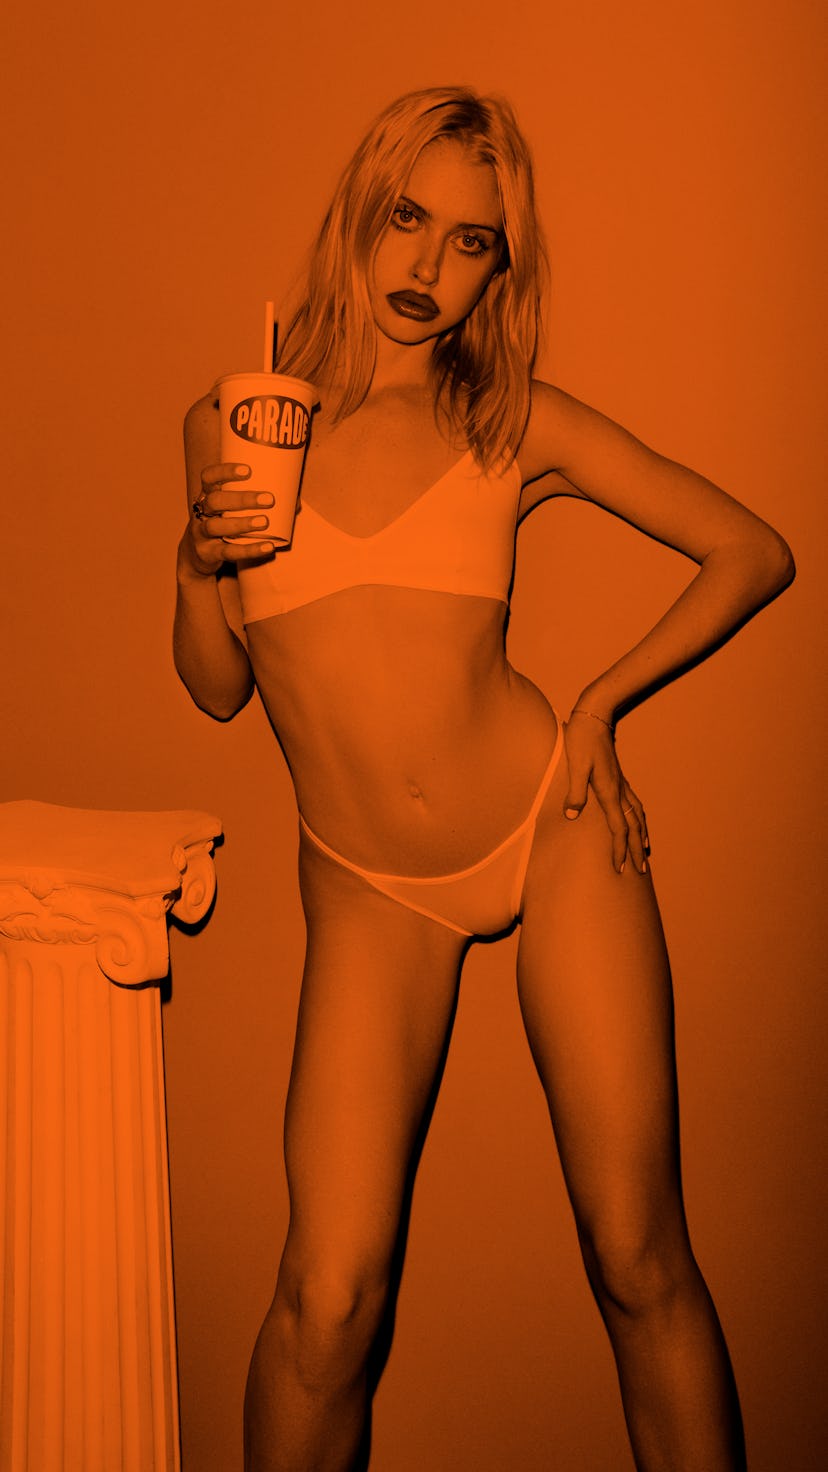 American actress and comedian Chloe Cherry posing in underwear, while holding a cup with a straw